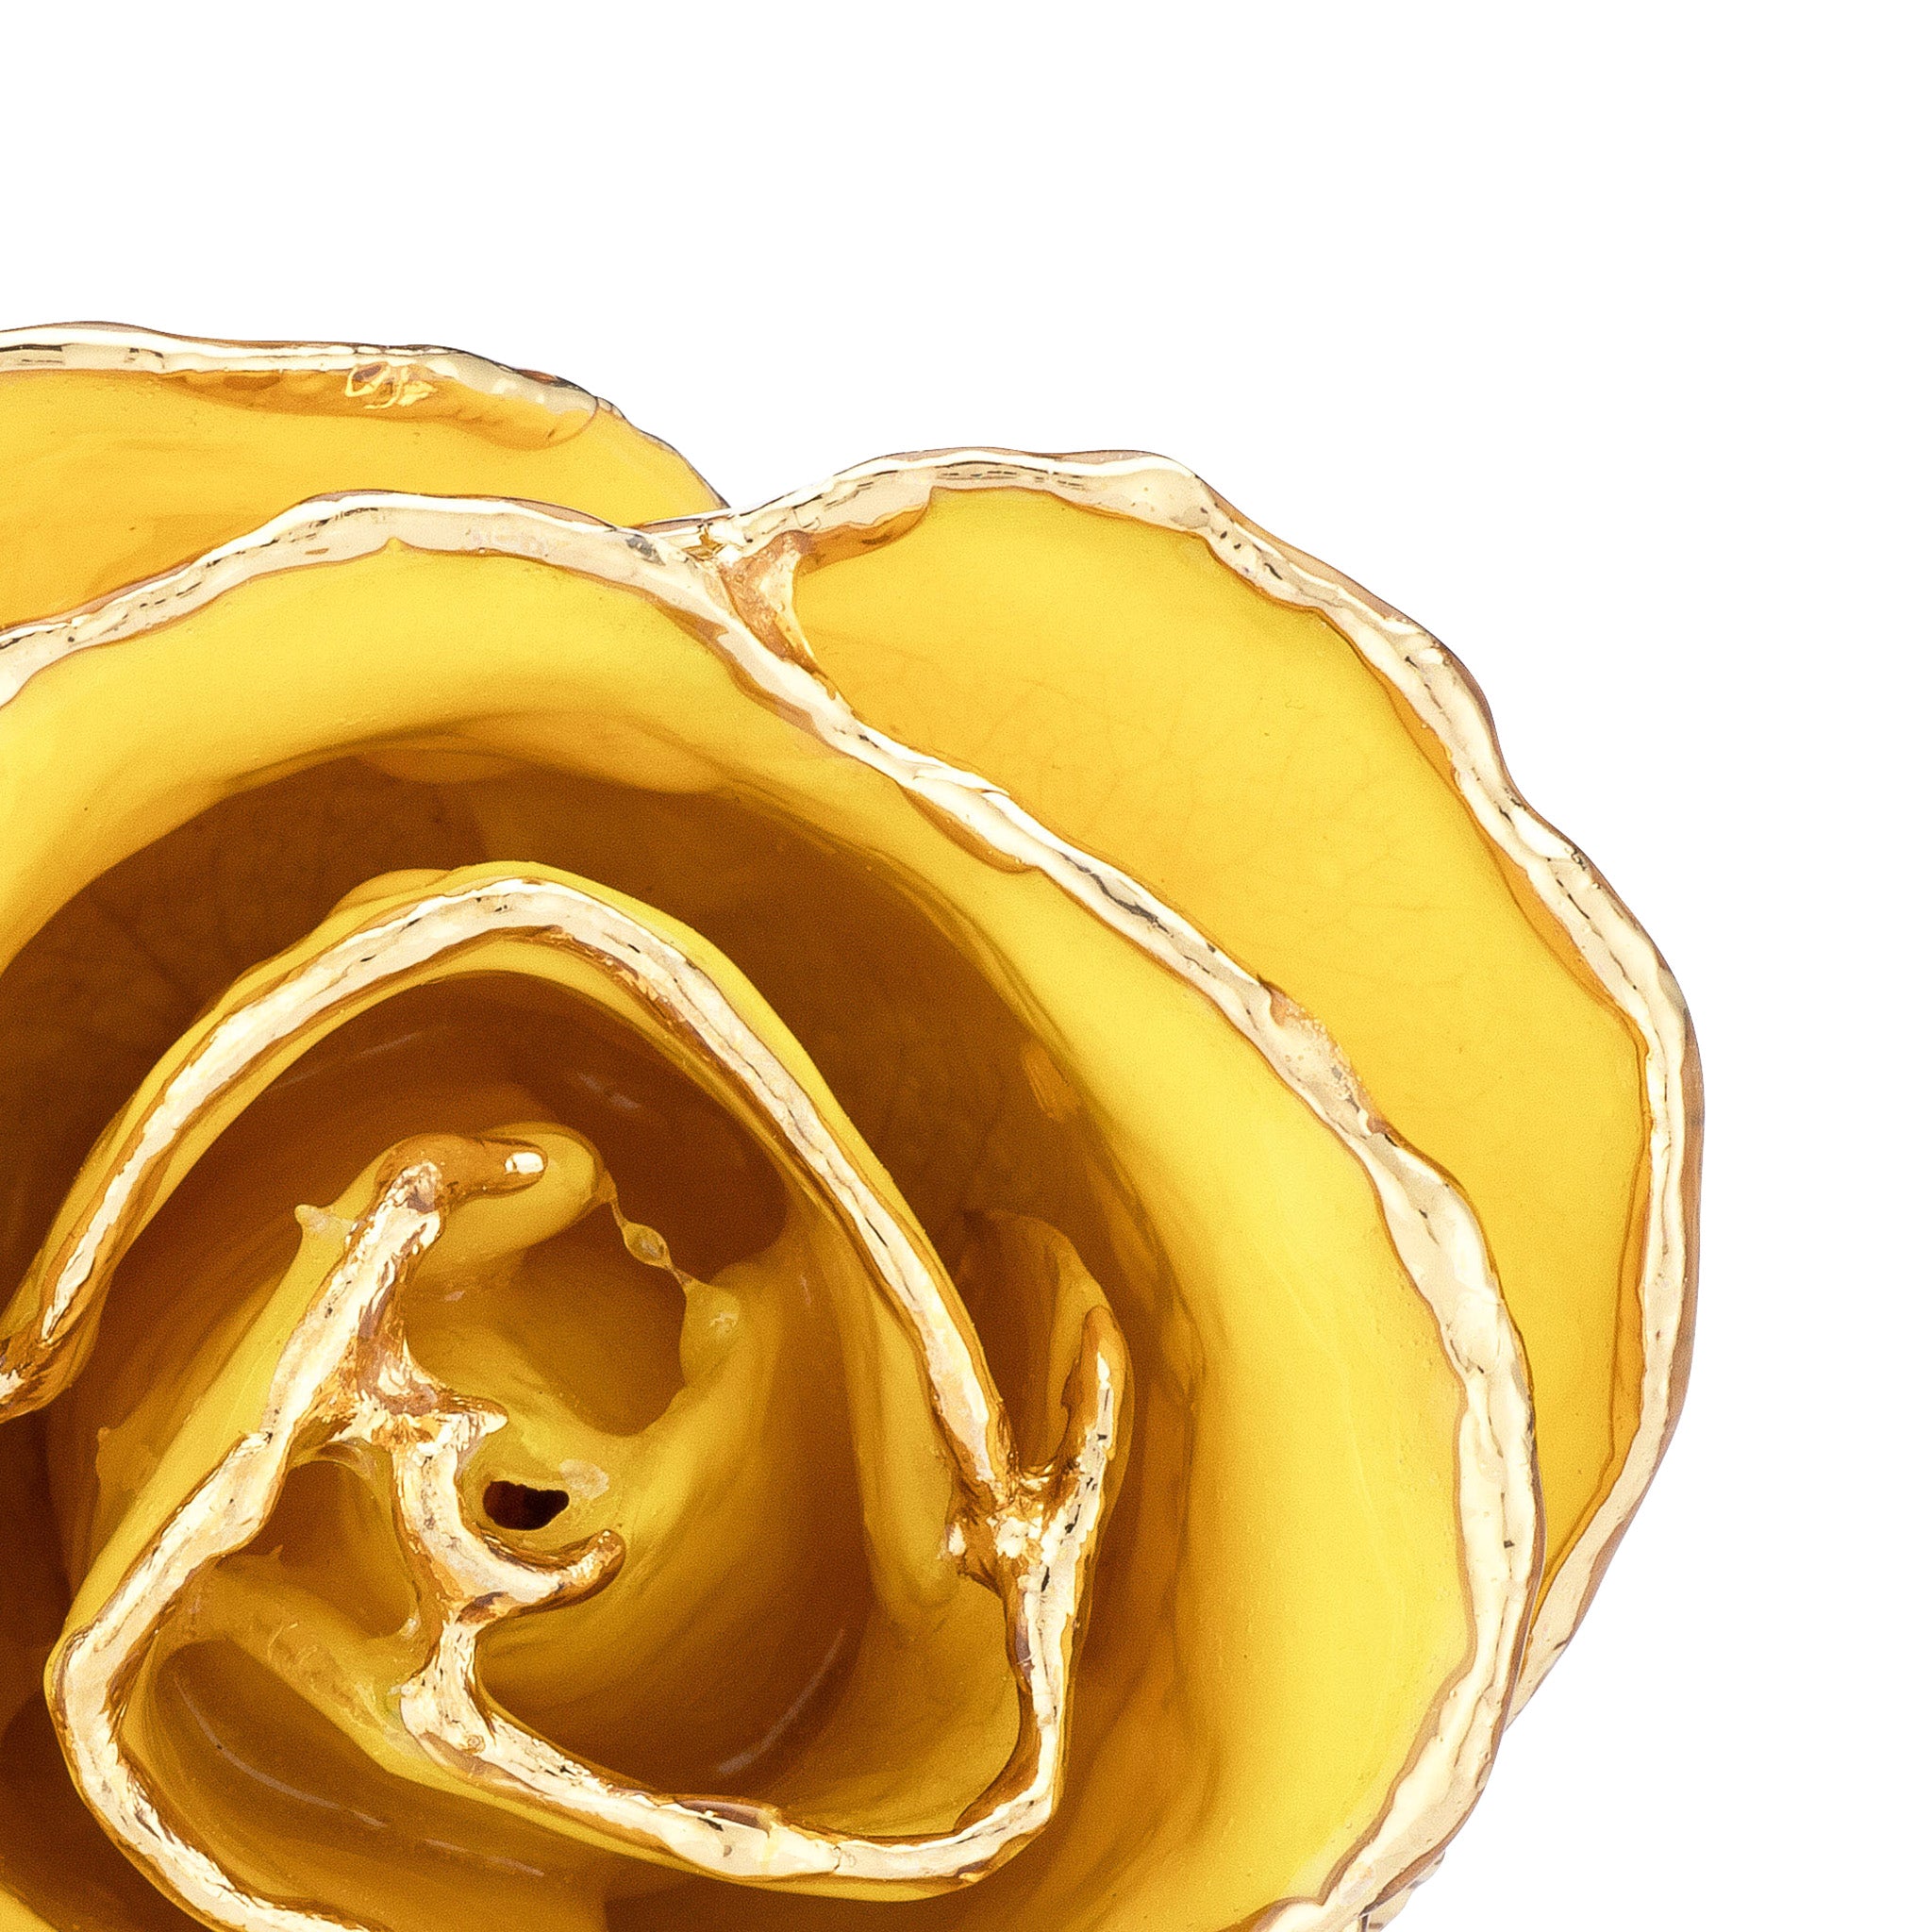 24K Gold Trimmed Forever Rose with Yellow Petals. View of Stem, Leaves, and Rose Petals and Showing Detail of Gold Trim. zoomed in view from top.